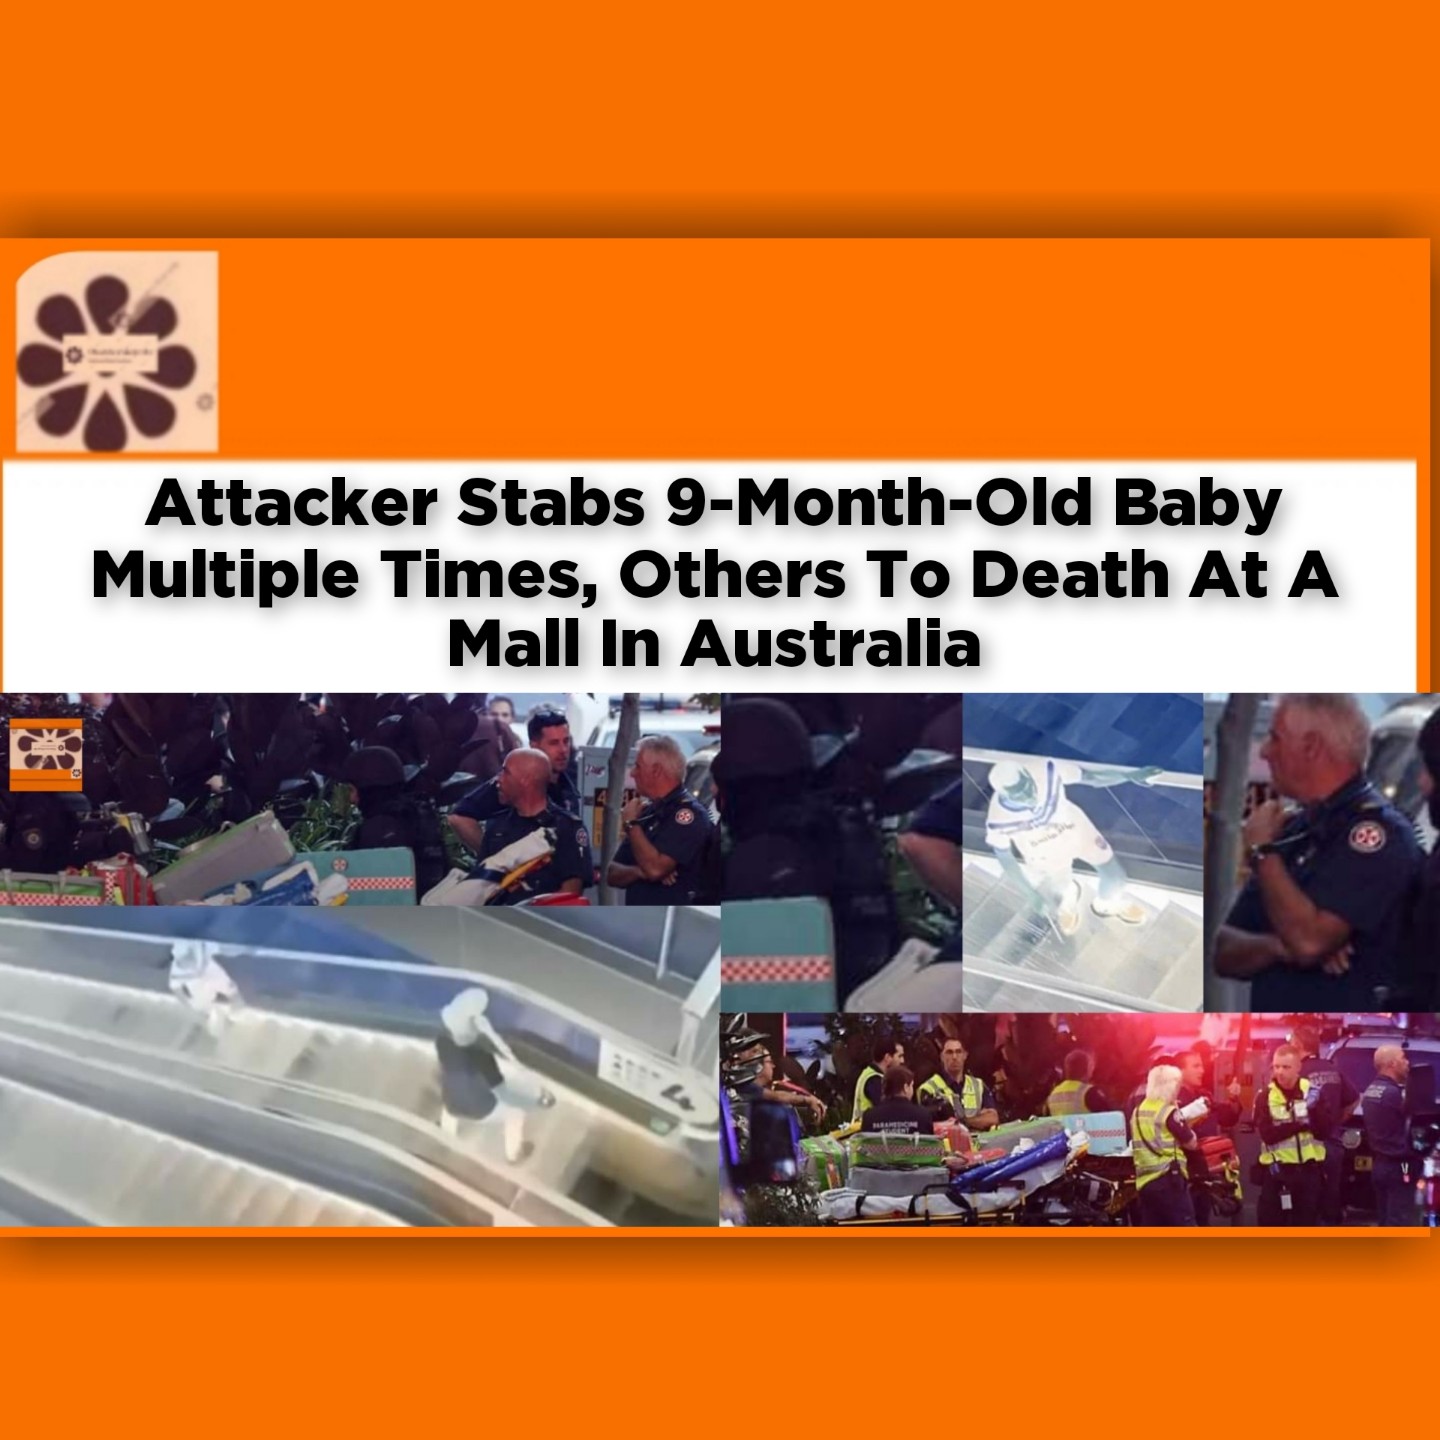 Attacker Stabs 9-Month-Old Baby Multiple Times, Others To Death At A Mall In Australia ~ OsazuwaAkonedo #Etsako